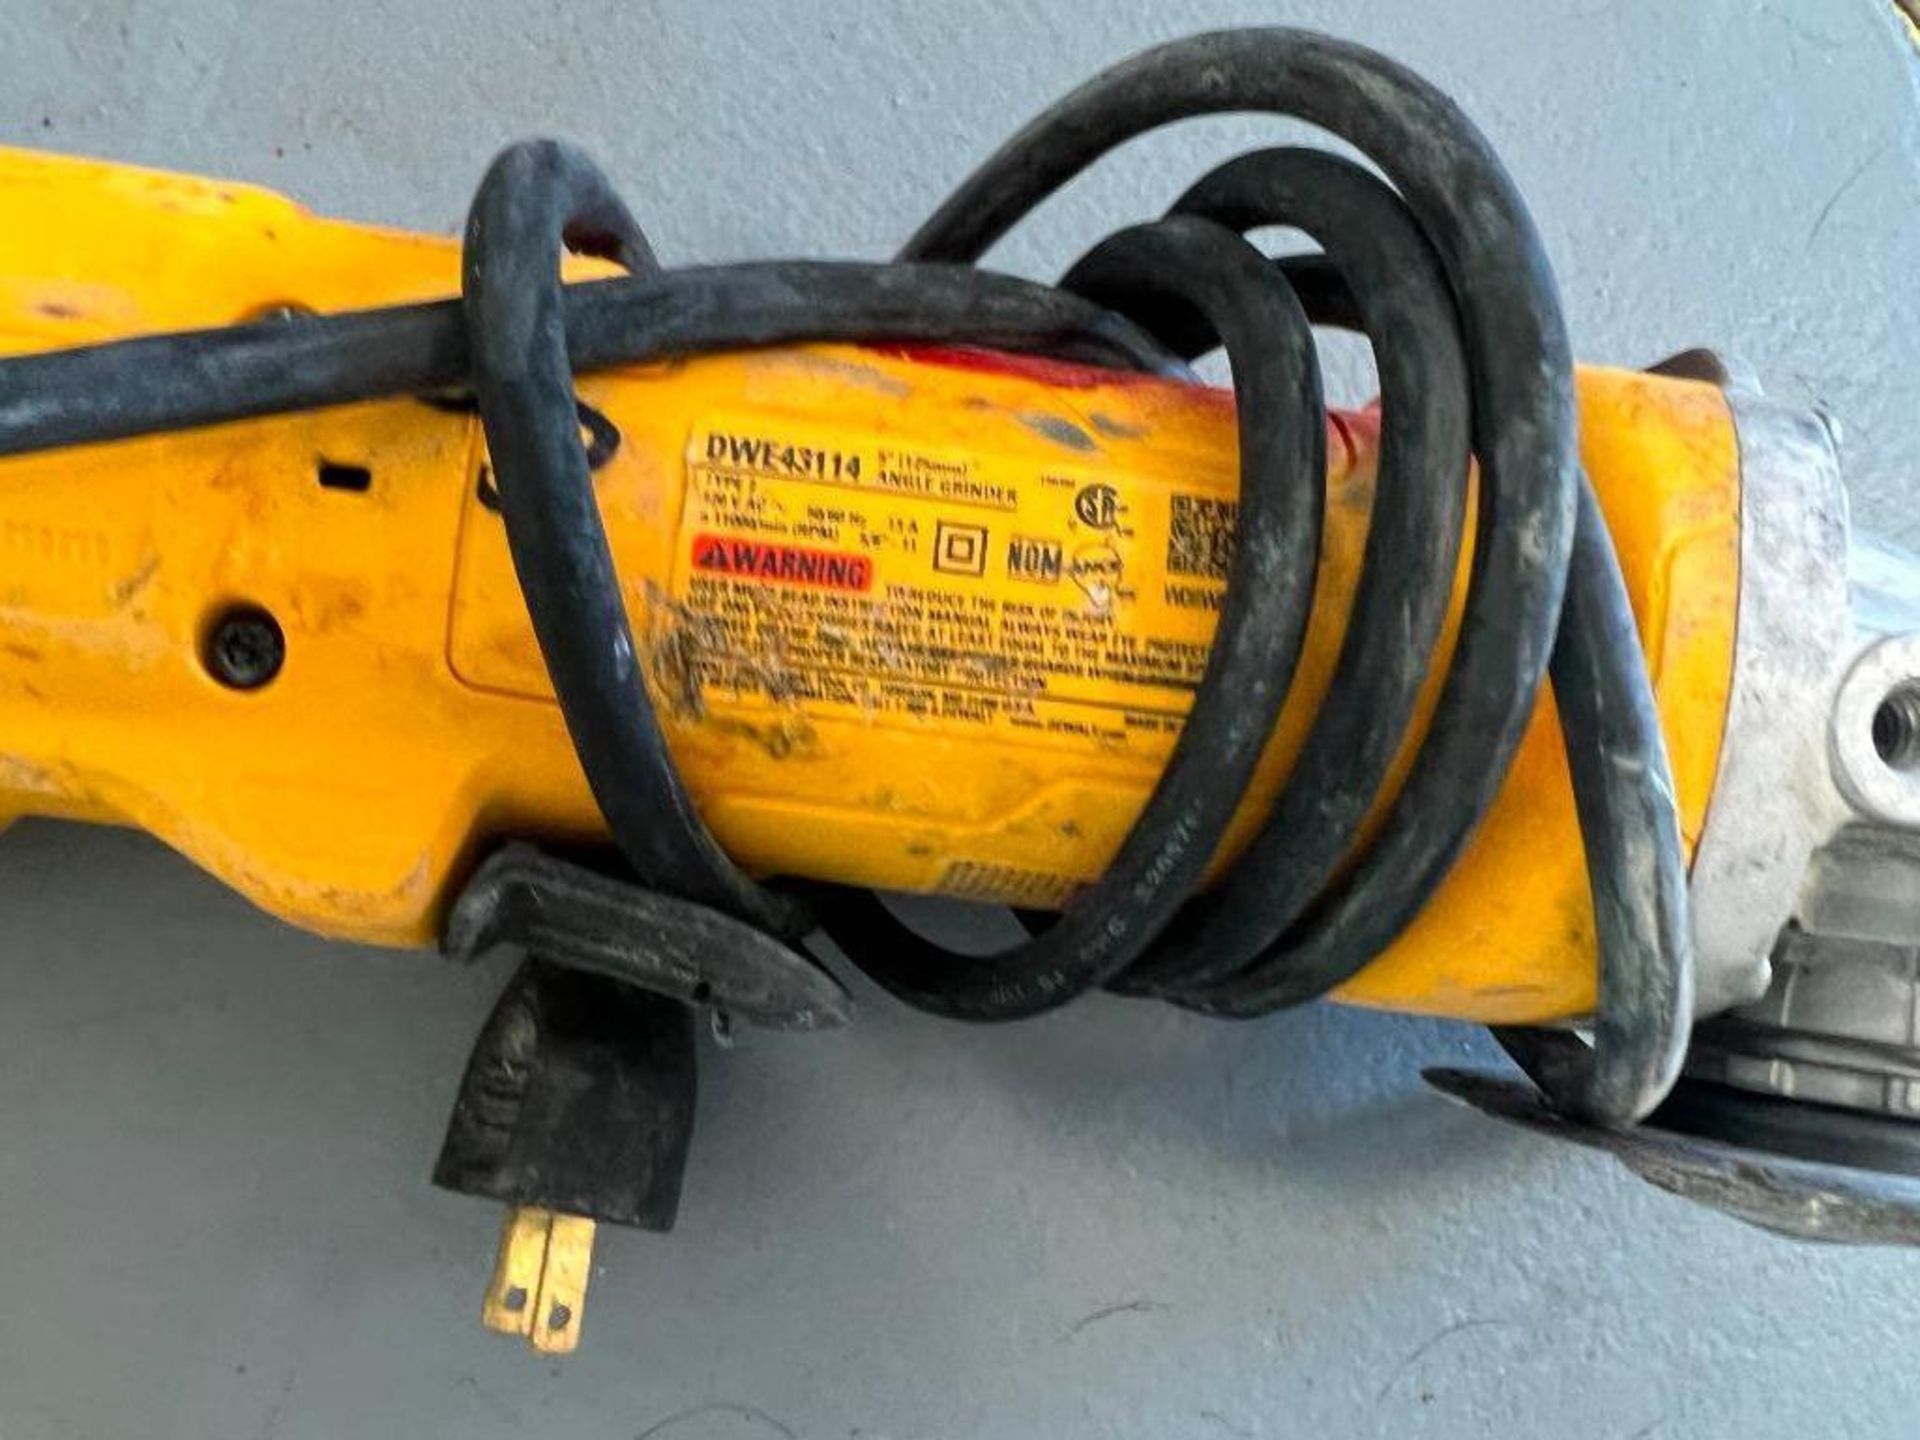 (1) DeWalt  4 1/2" Angle Grinder, DWE4519 & (1) DeWalt 5" Angle Grinder, DWE43114. Located in Mt. Pl - Image 2 of 3